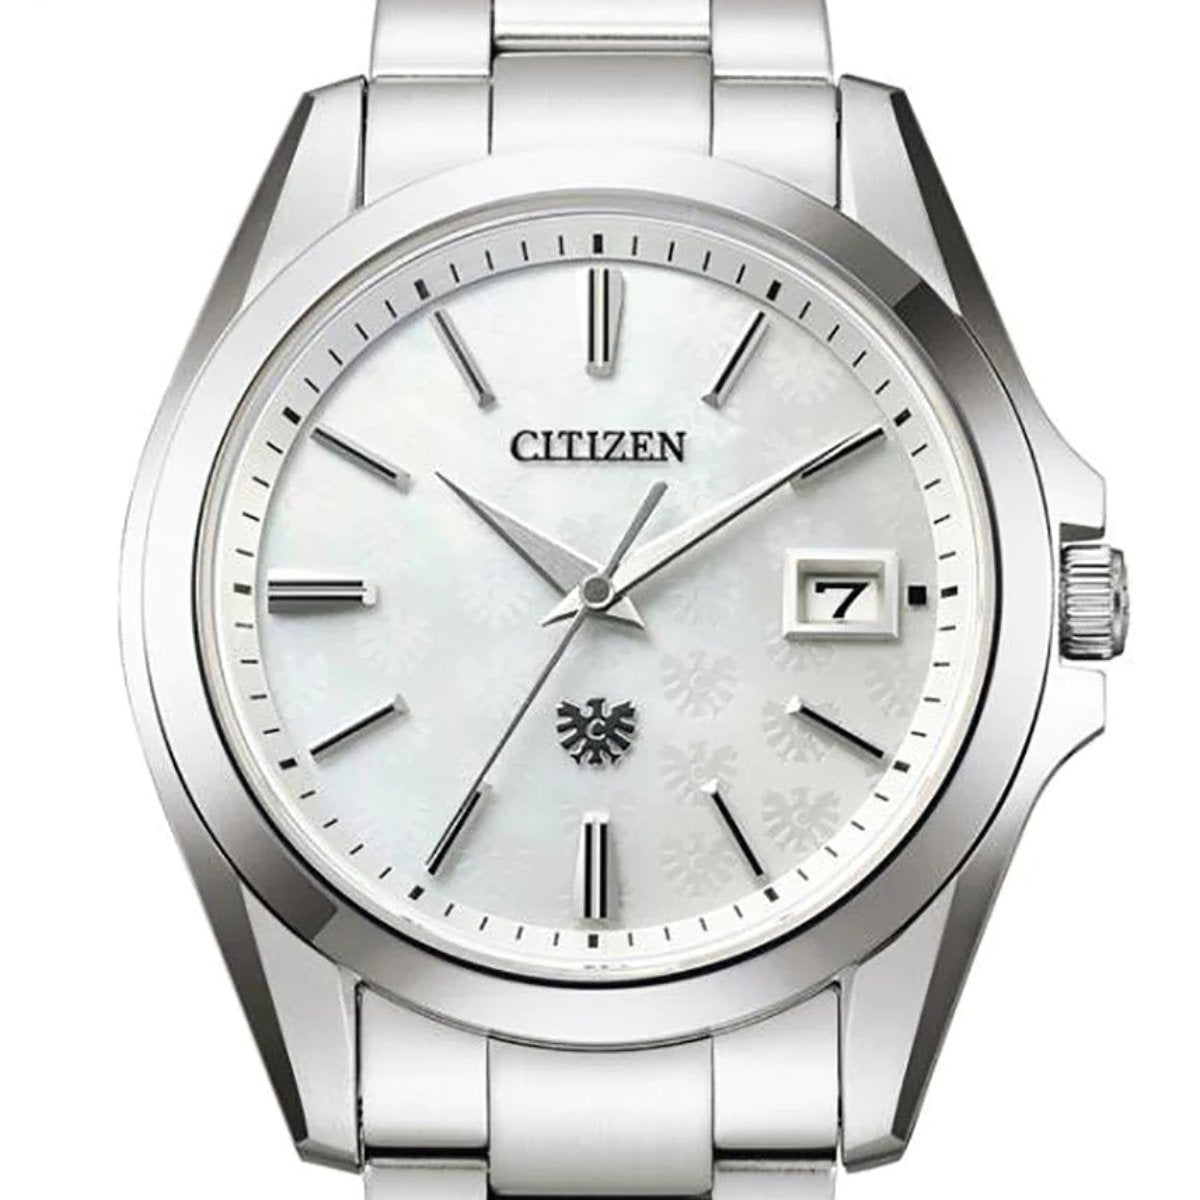 Citizen AQ4060-50W The Citizen Made in Japan Limited Edition Watch (PRE-ORDER) -Citizen